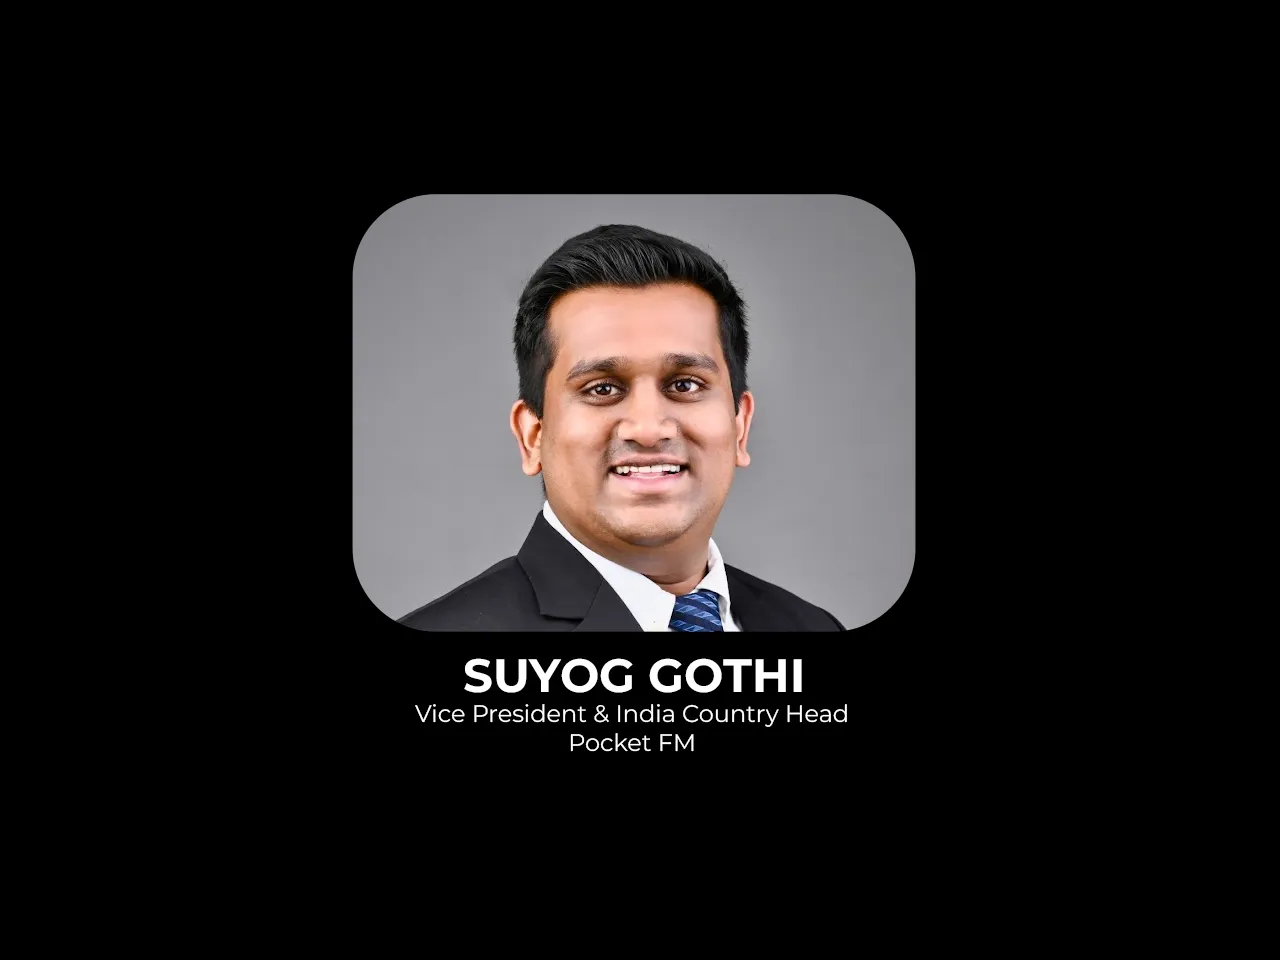 Pocket FM appoints Suyog Gothi as VP and India Country Head